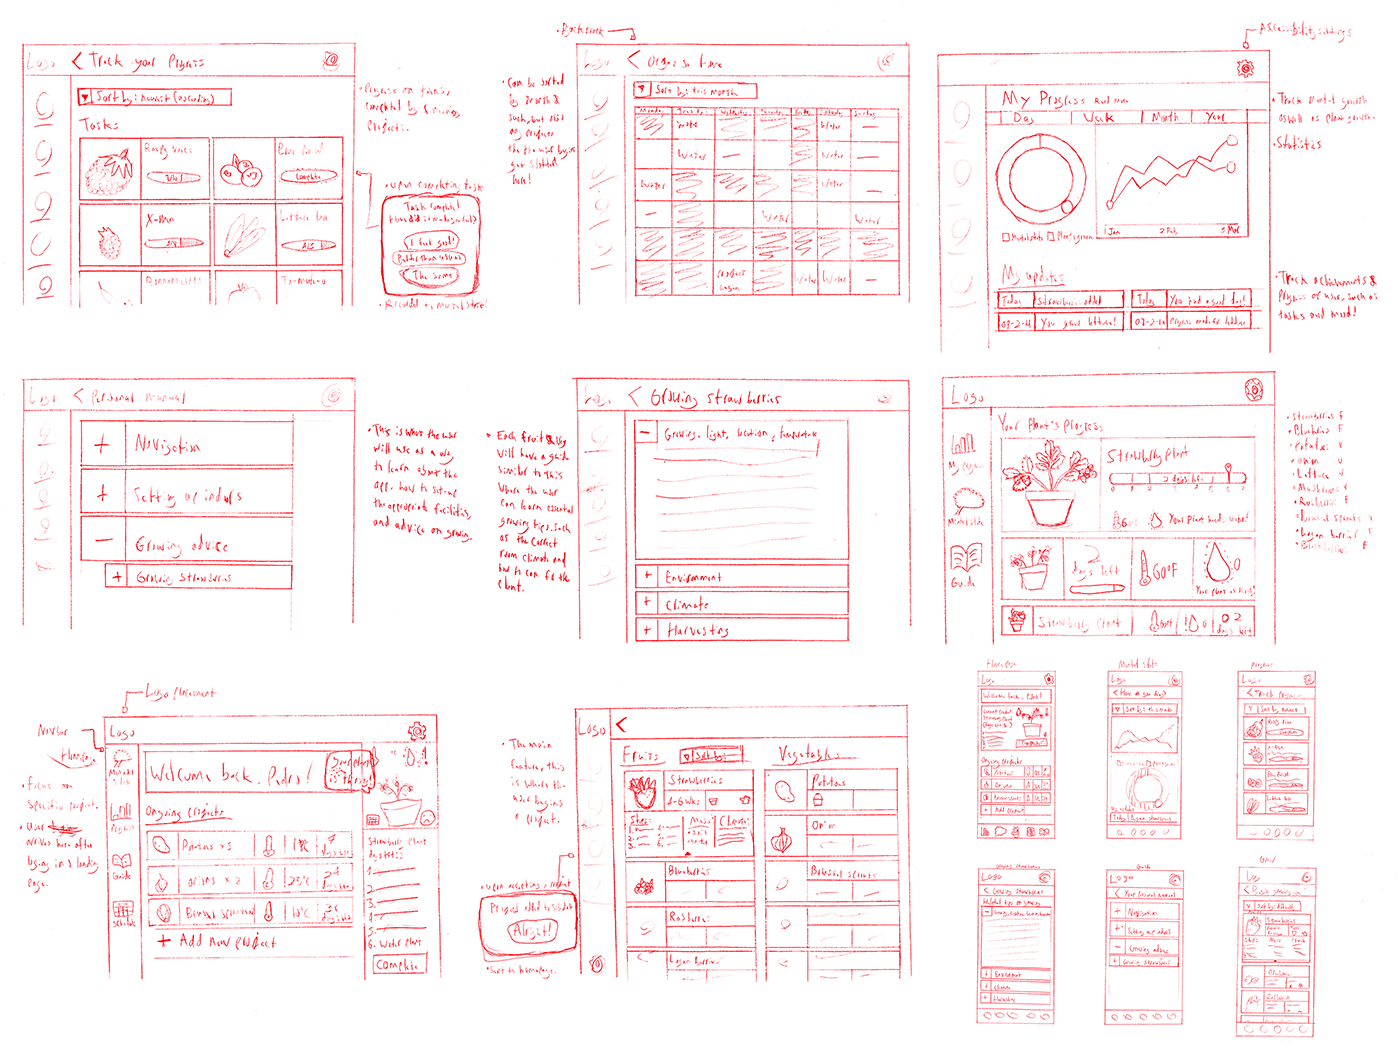 Wireframe sketches, based on user flow, for both desktop and mobile screens.